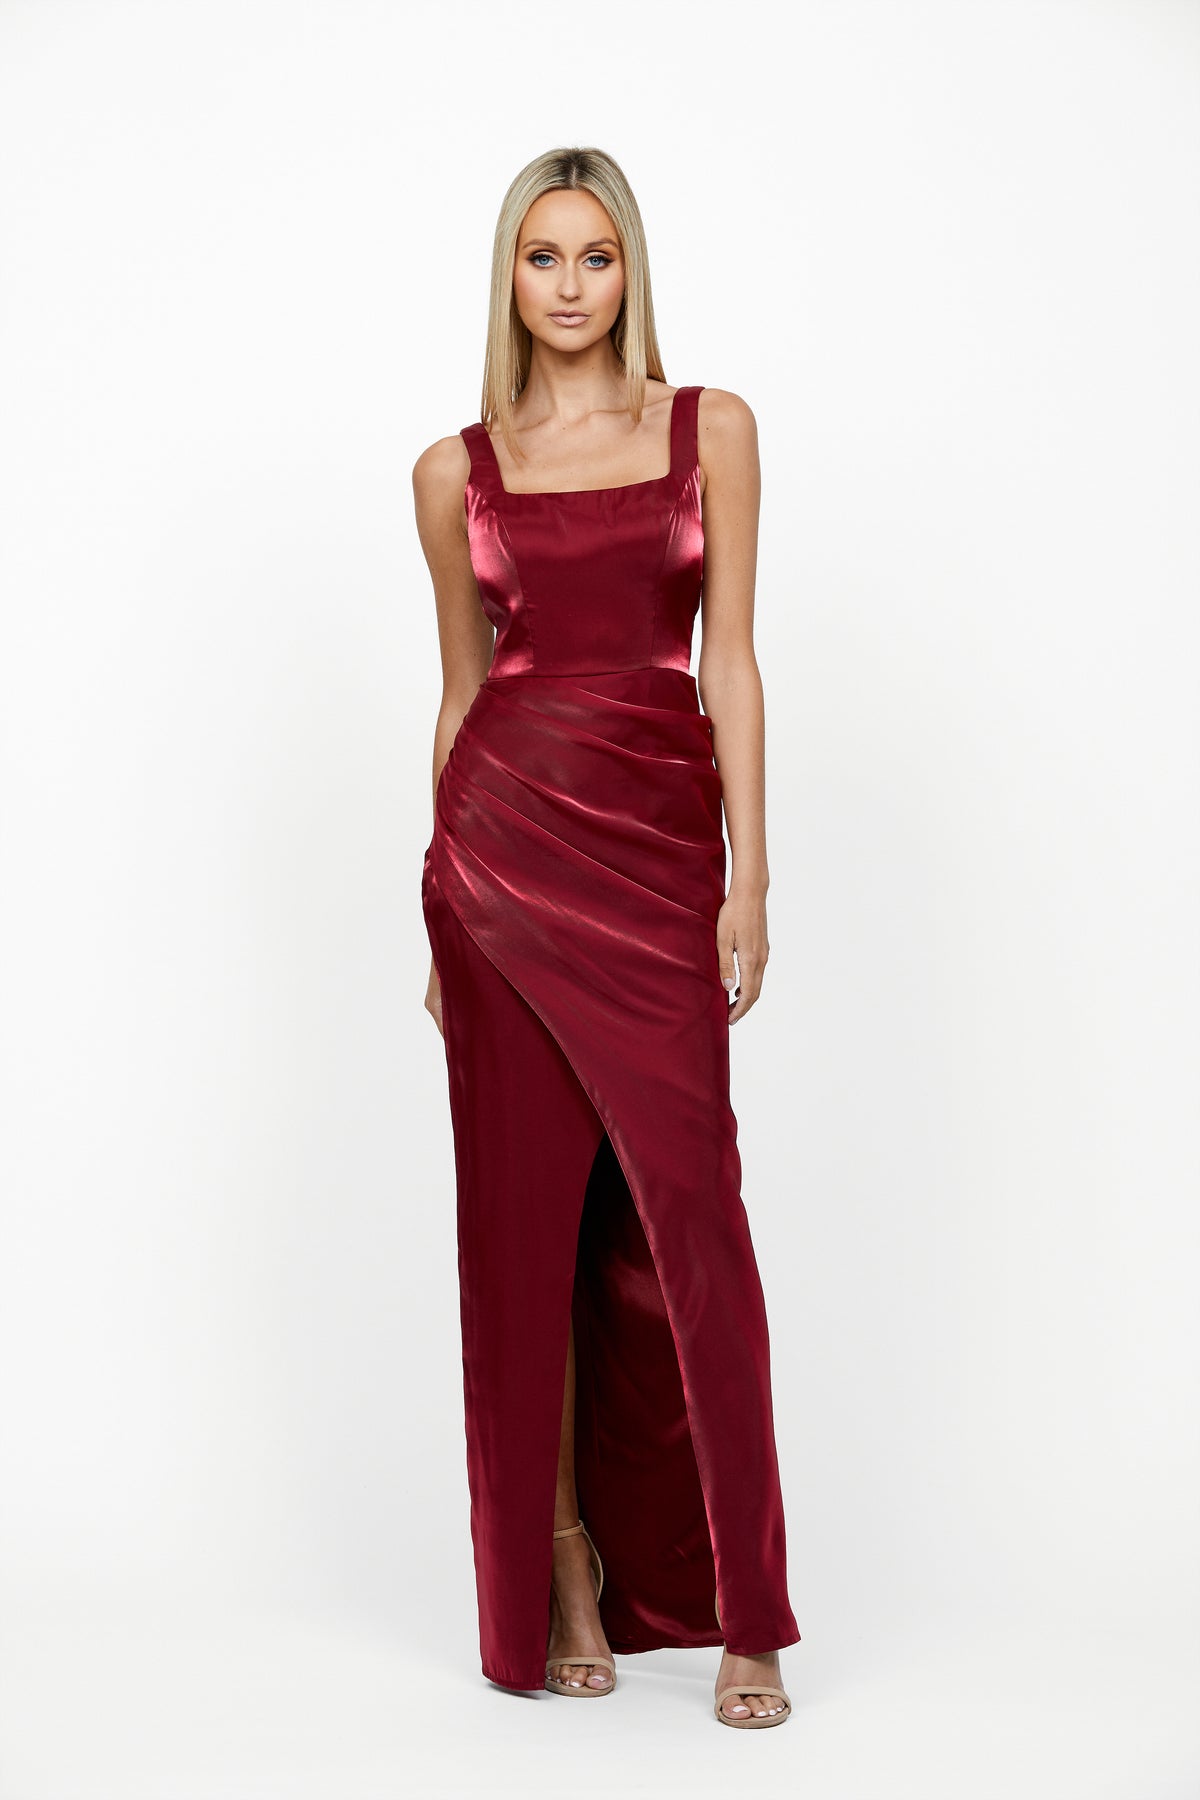 Minka Square Neck Draped Gown - Honey Fawn Boutique